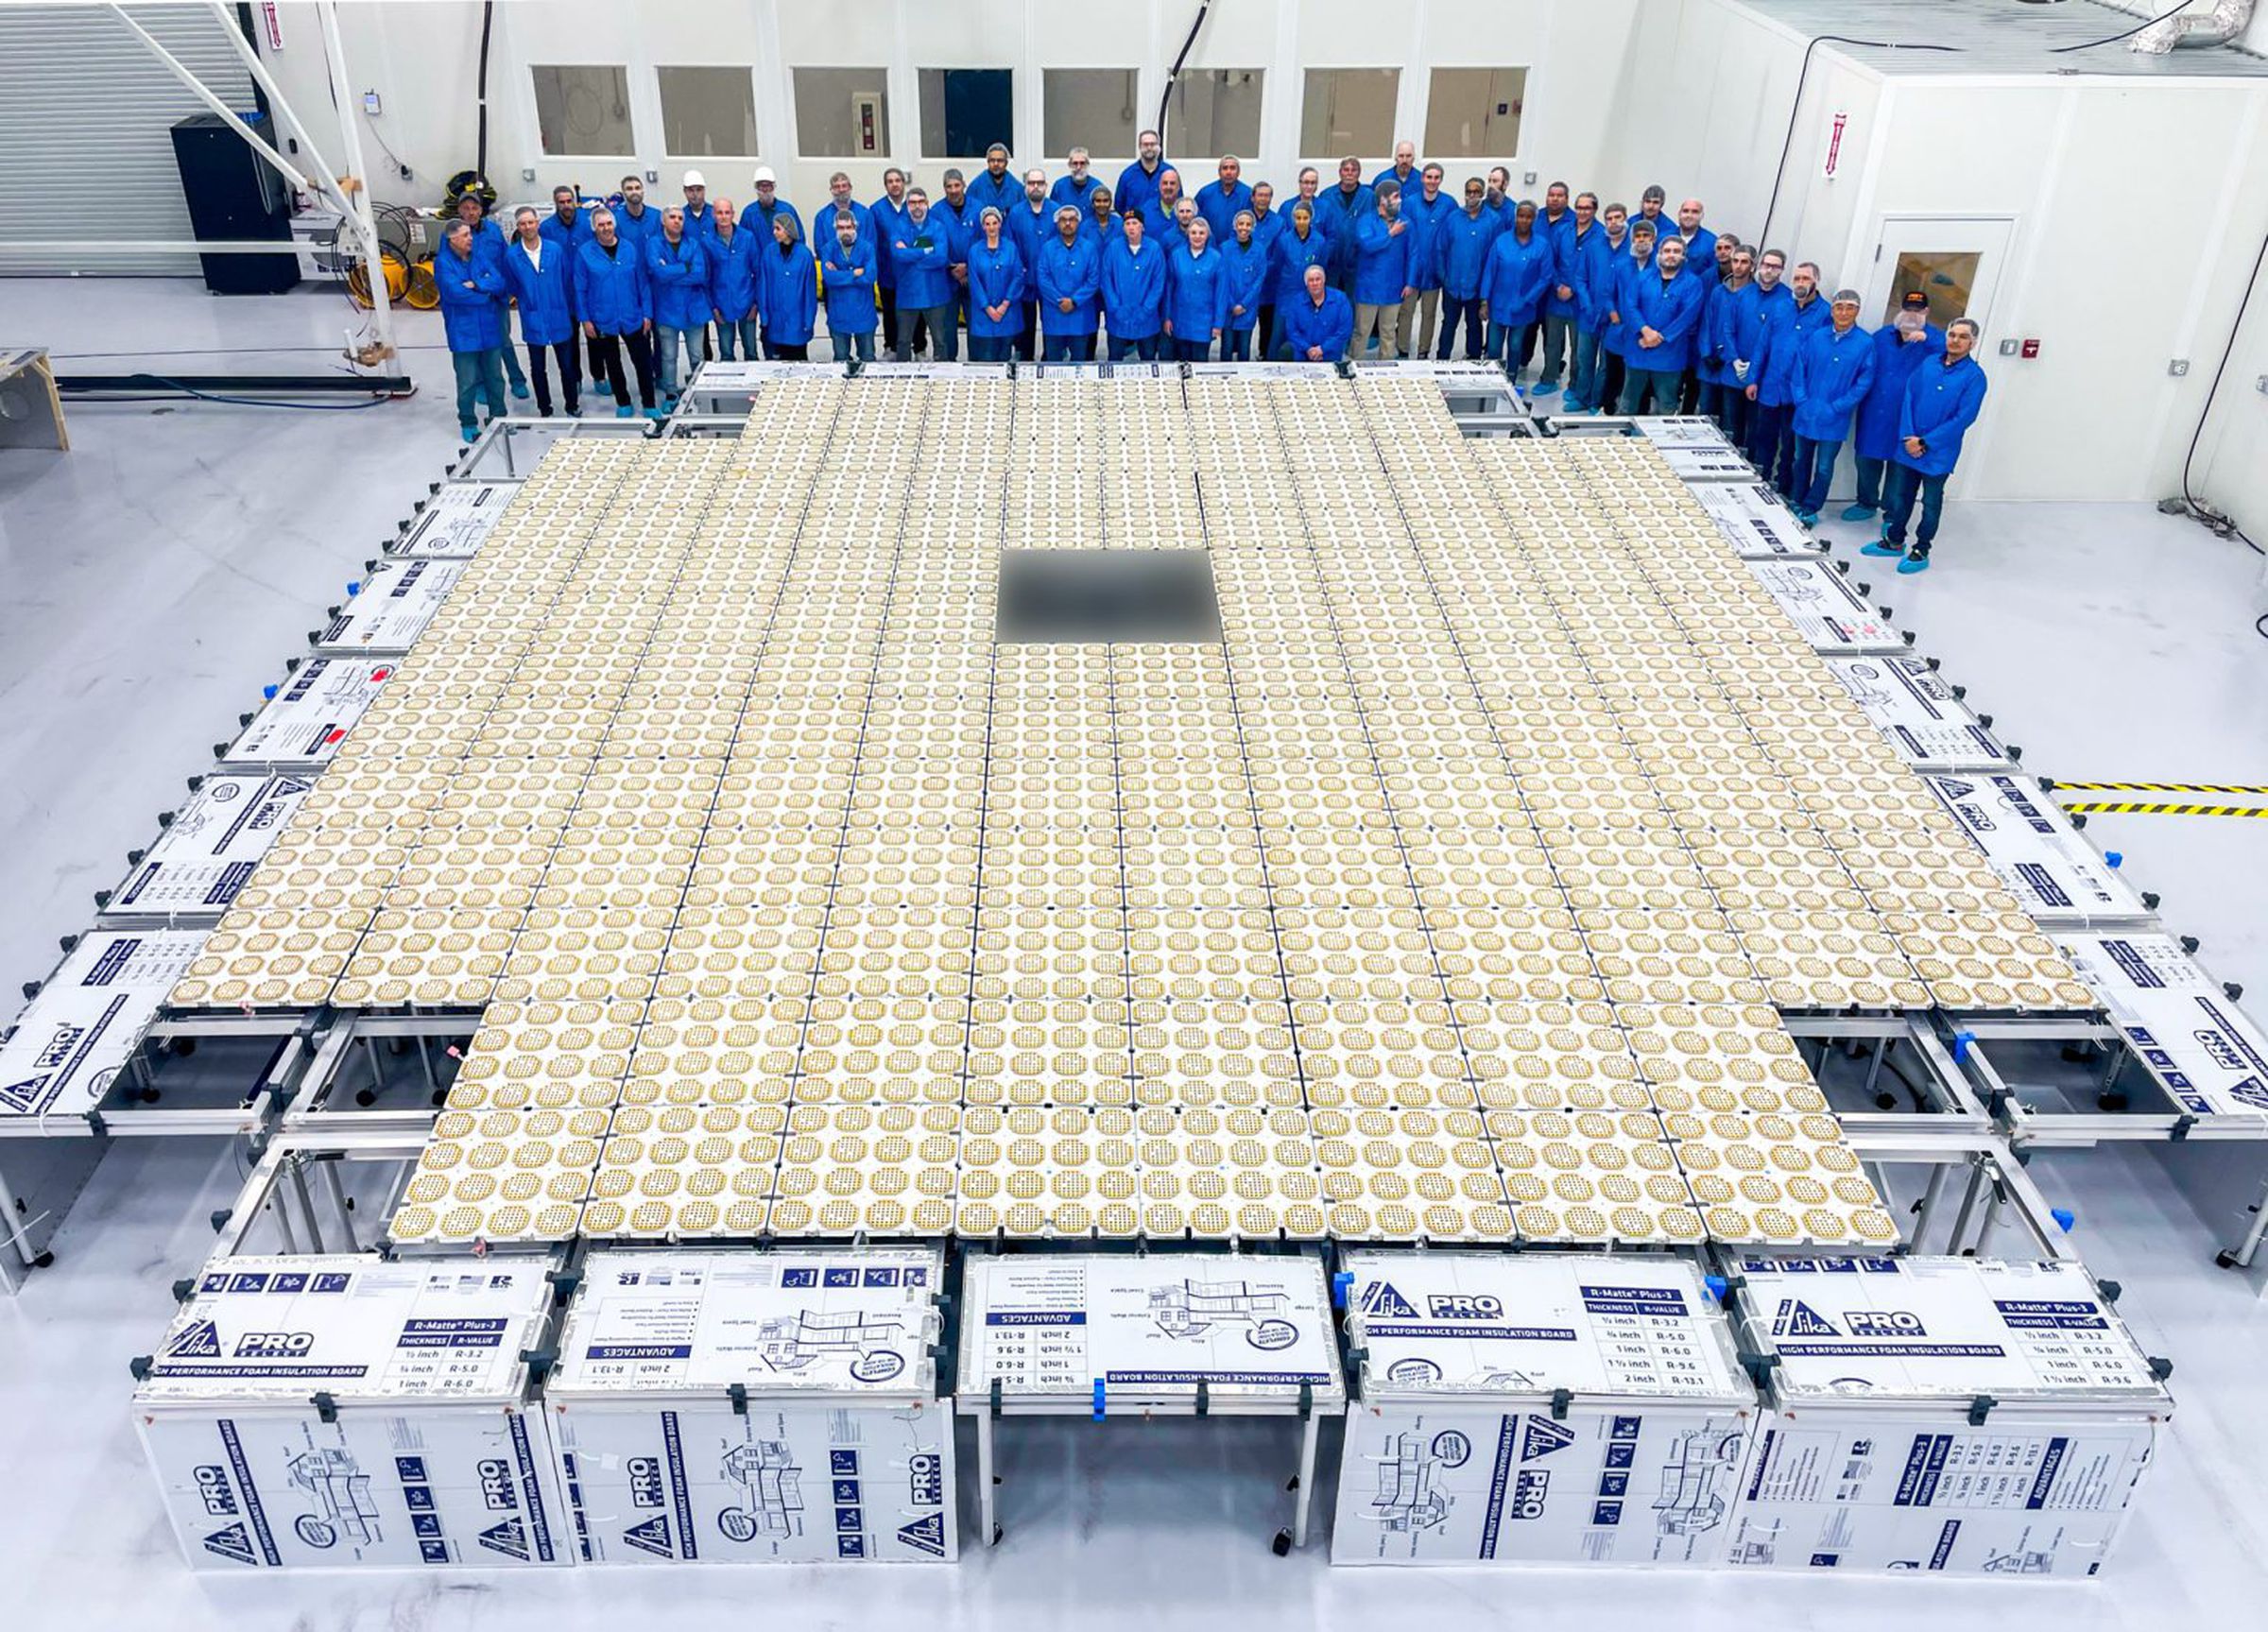 The BlueWalker 3 satellite was placed on a warehouse floor, surrounded by technicians wearing blue overalls.